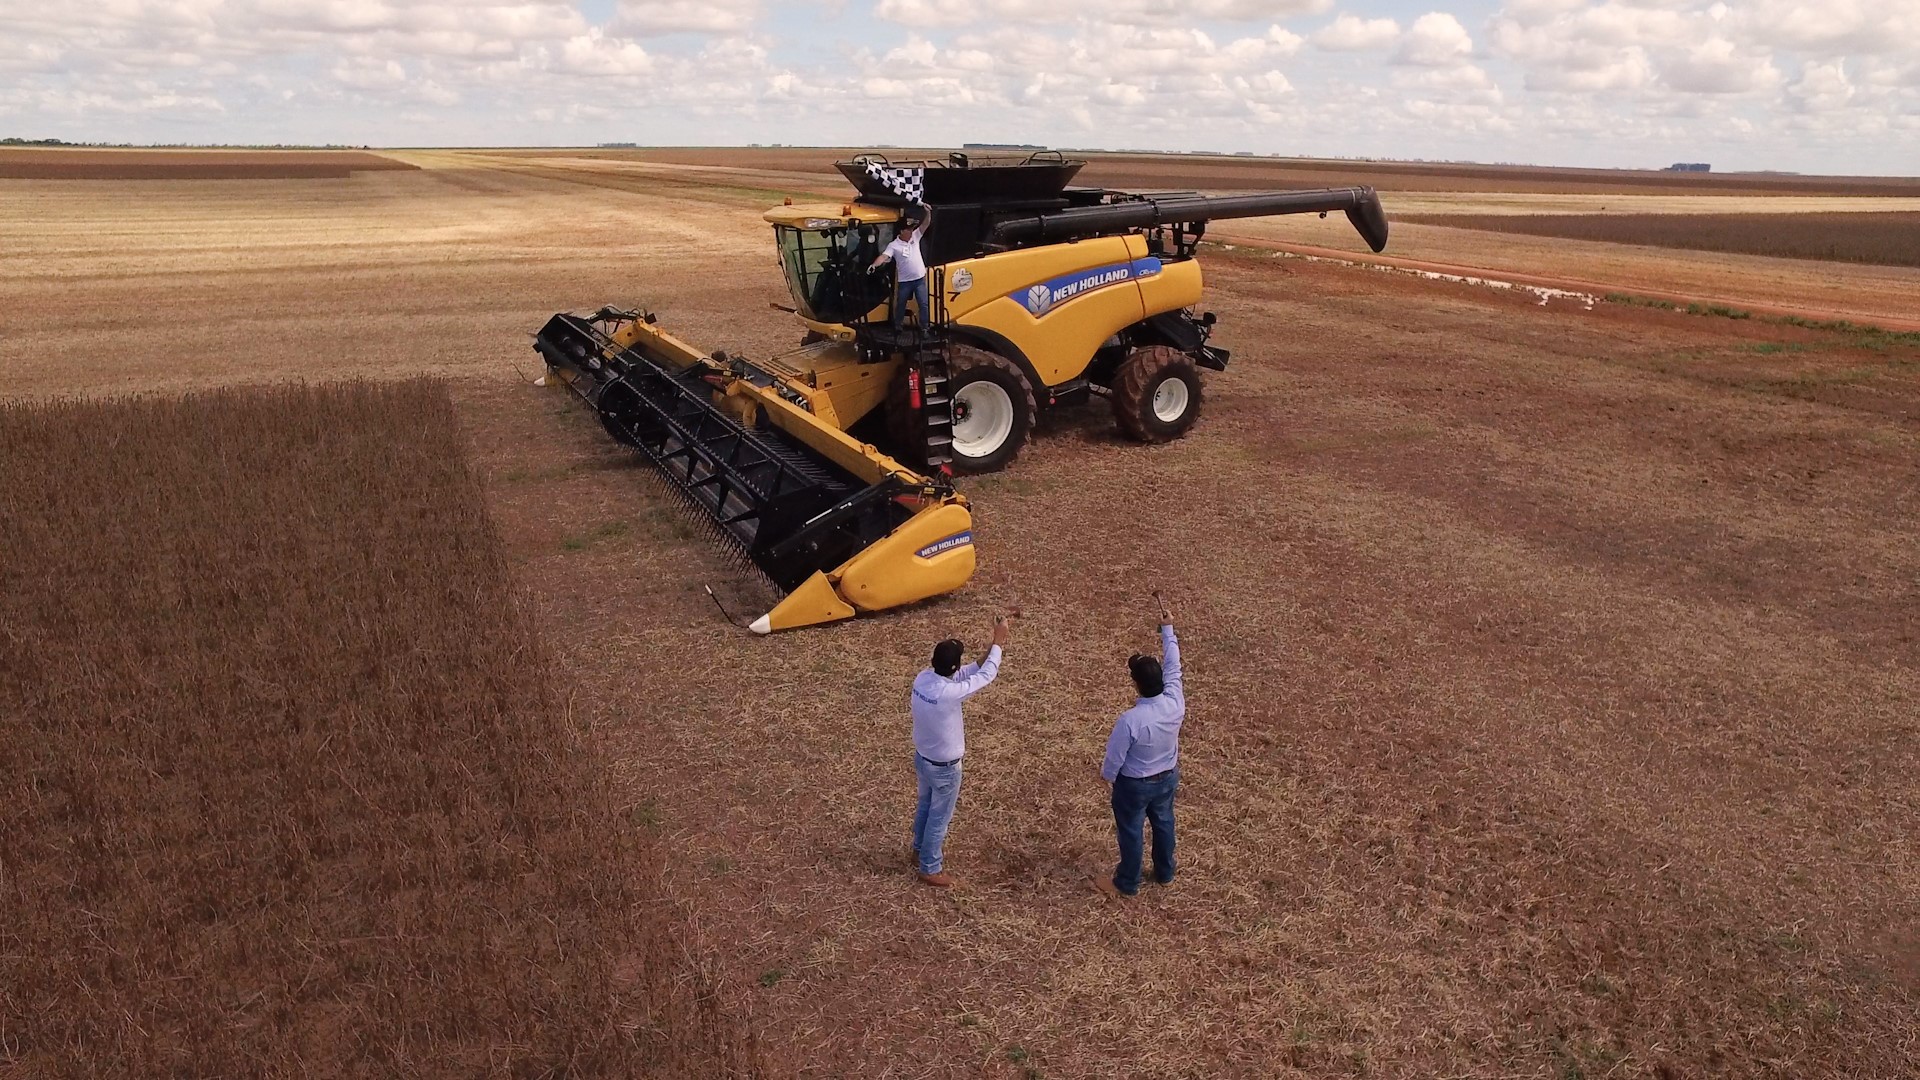 New Holland Agriculture, a brand of CNH Industrial, has set a new world record in soybean harvesting in Brazil